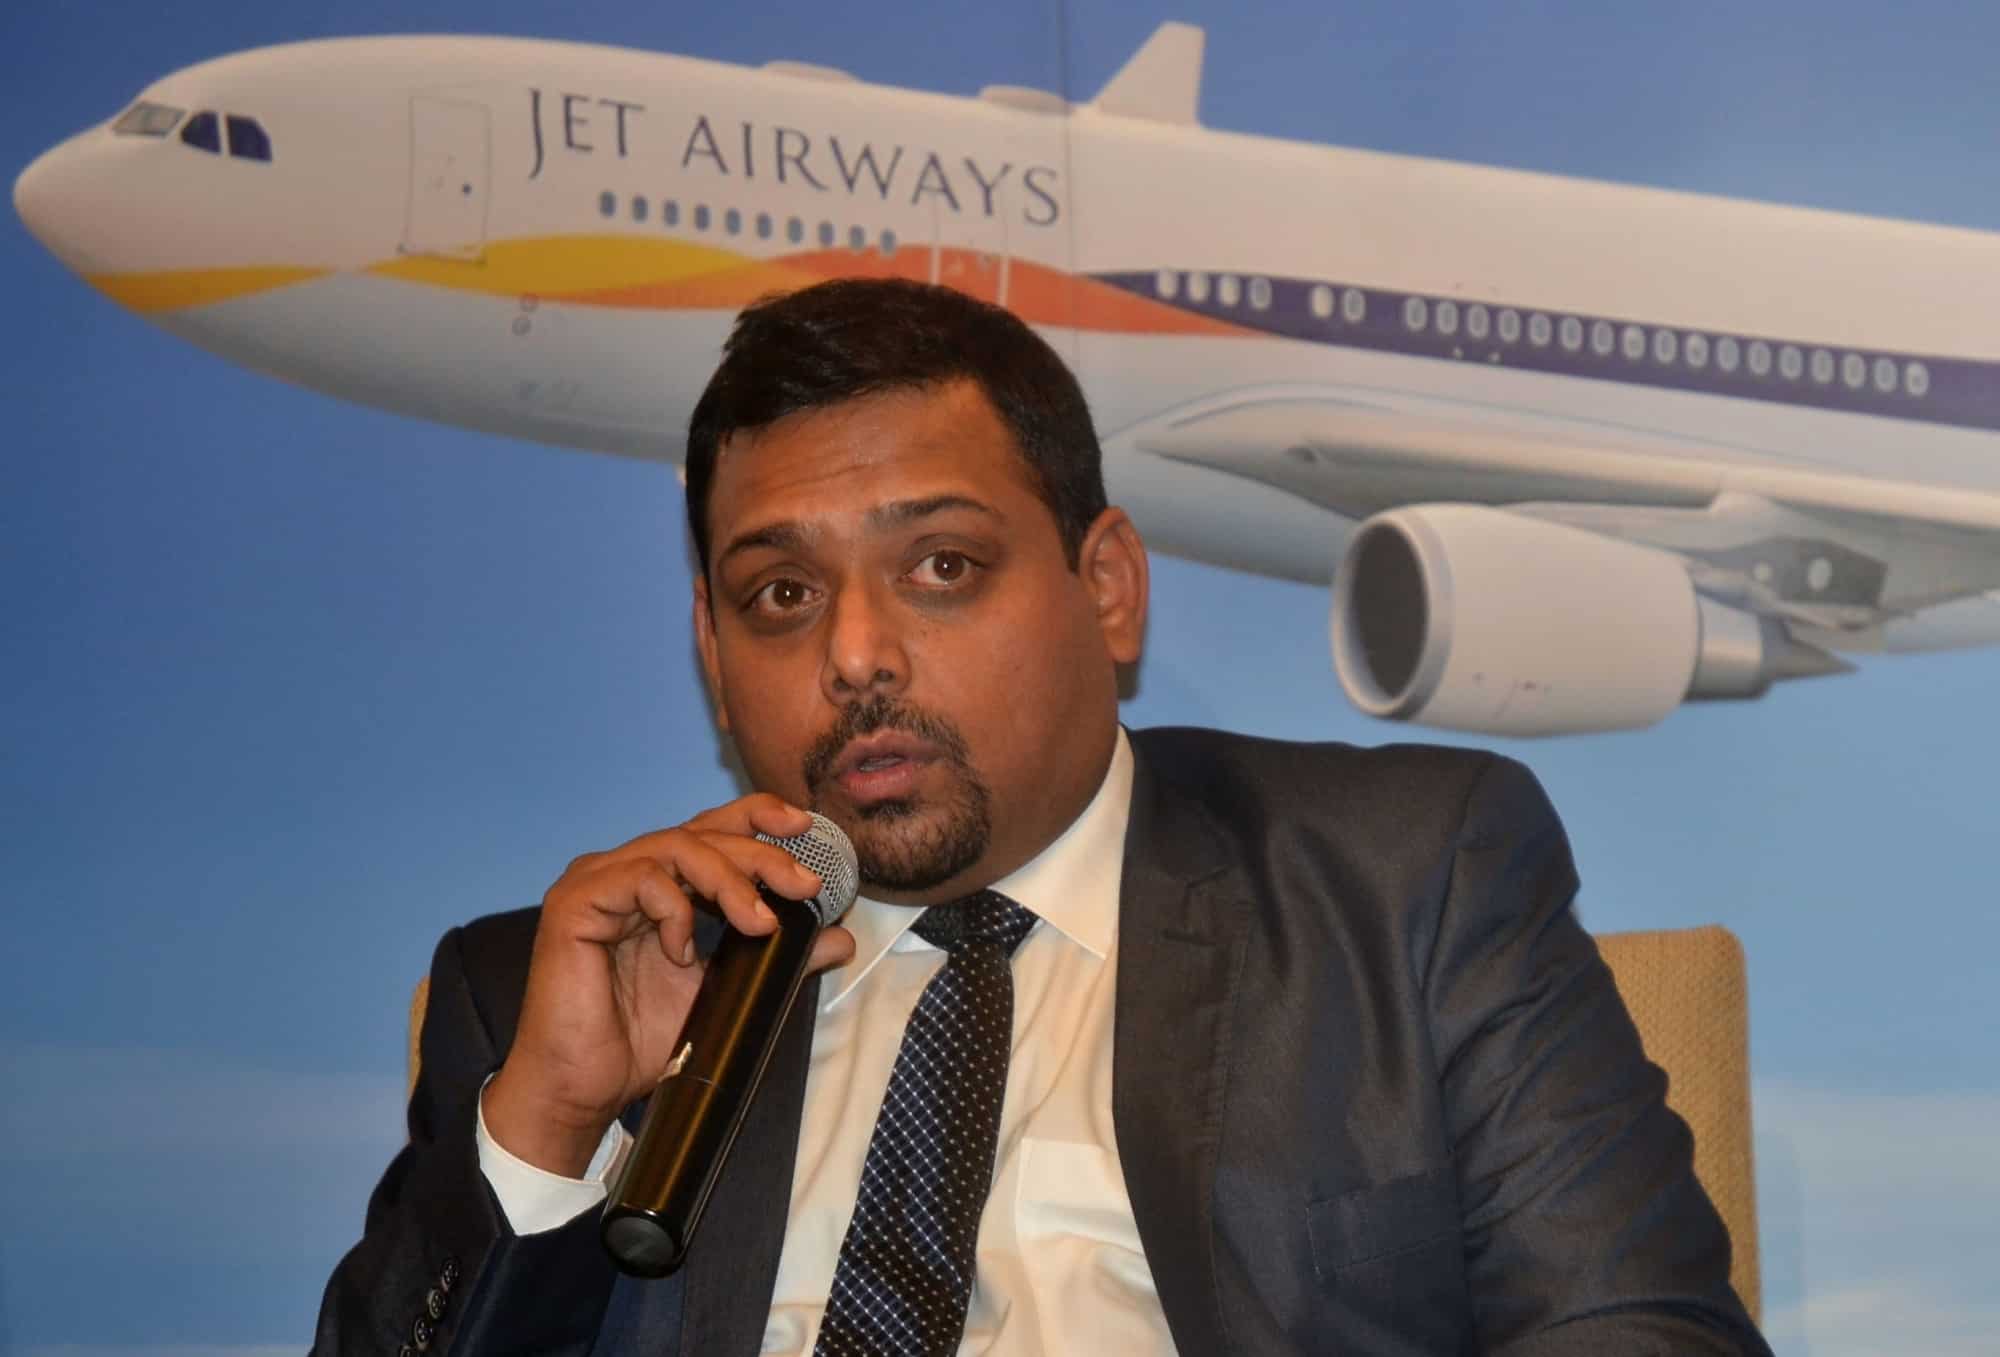 jet-airways-to-introduce-special-economy-class-fares-zee-business